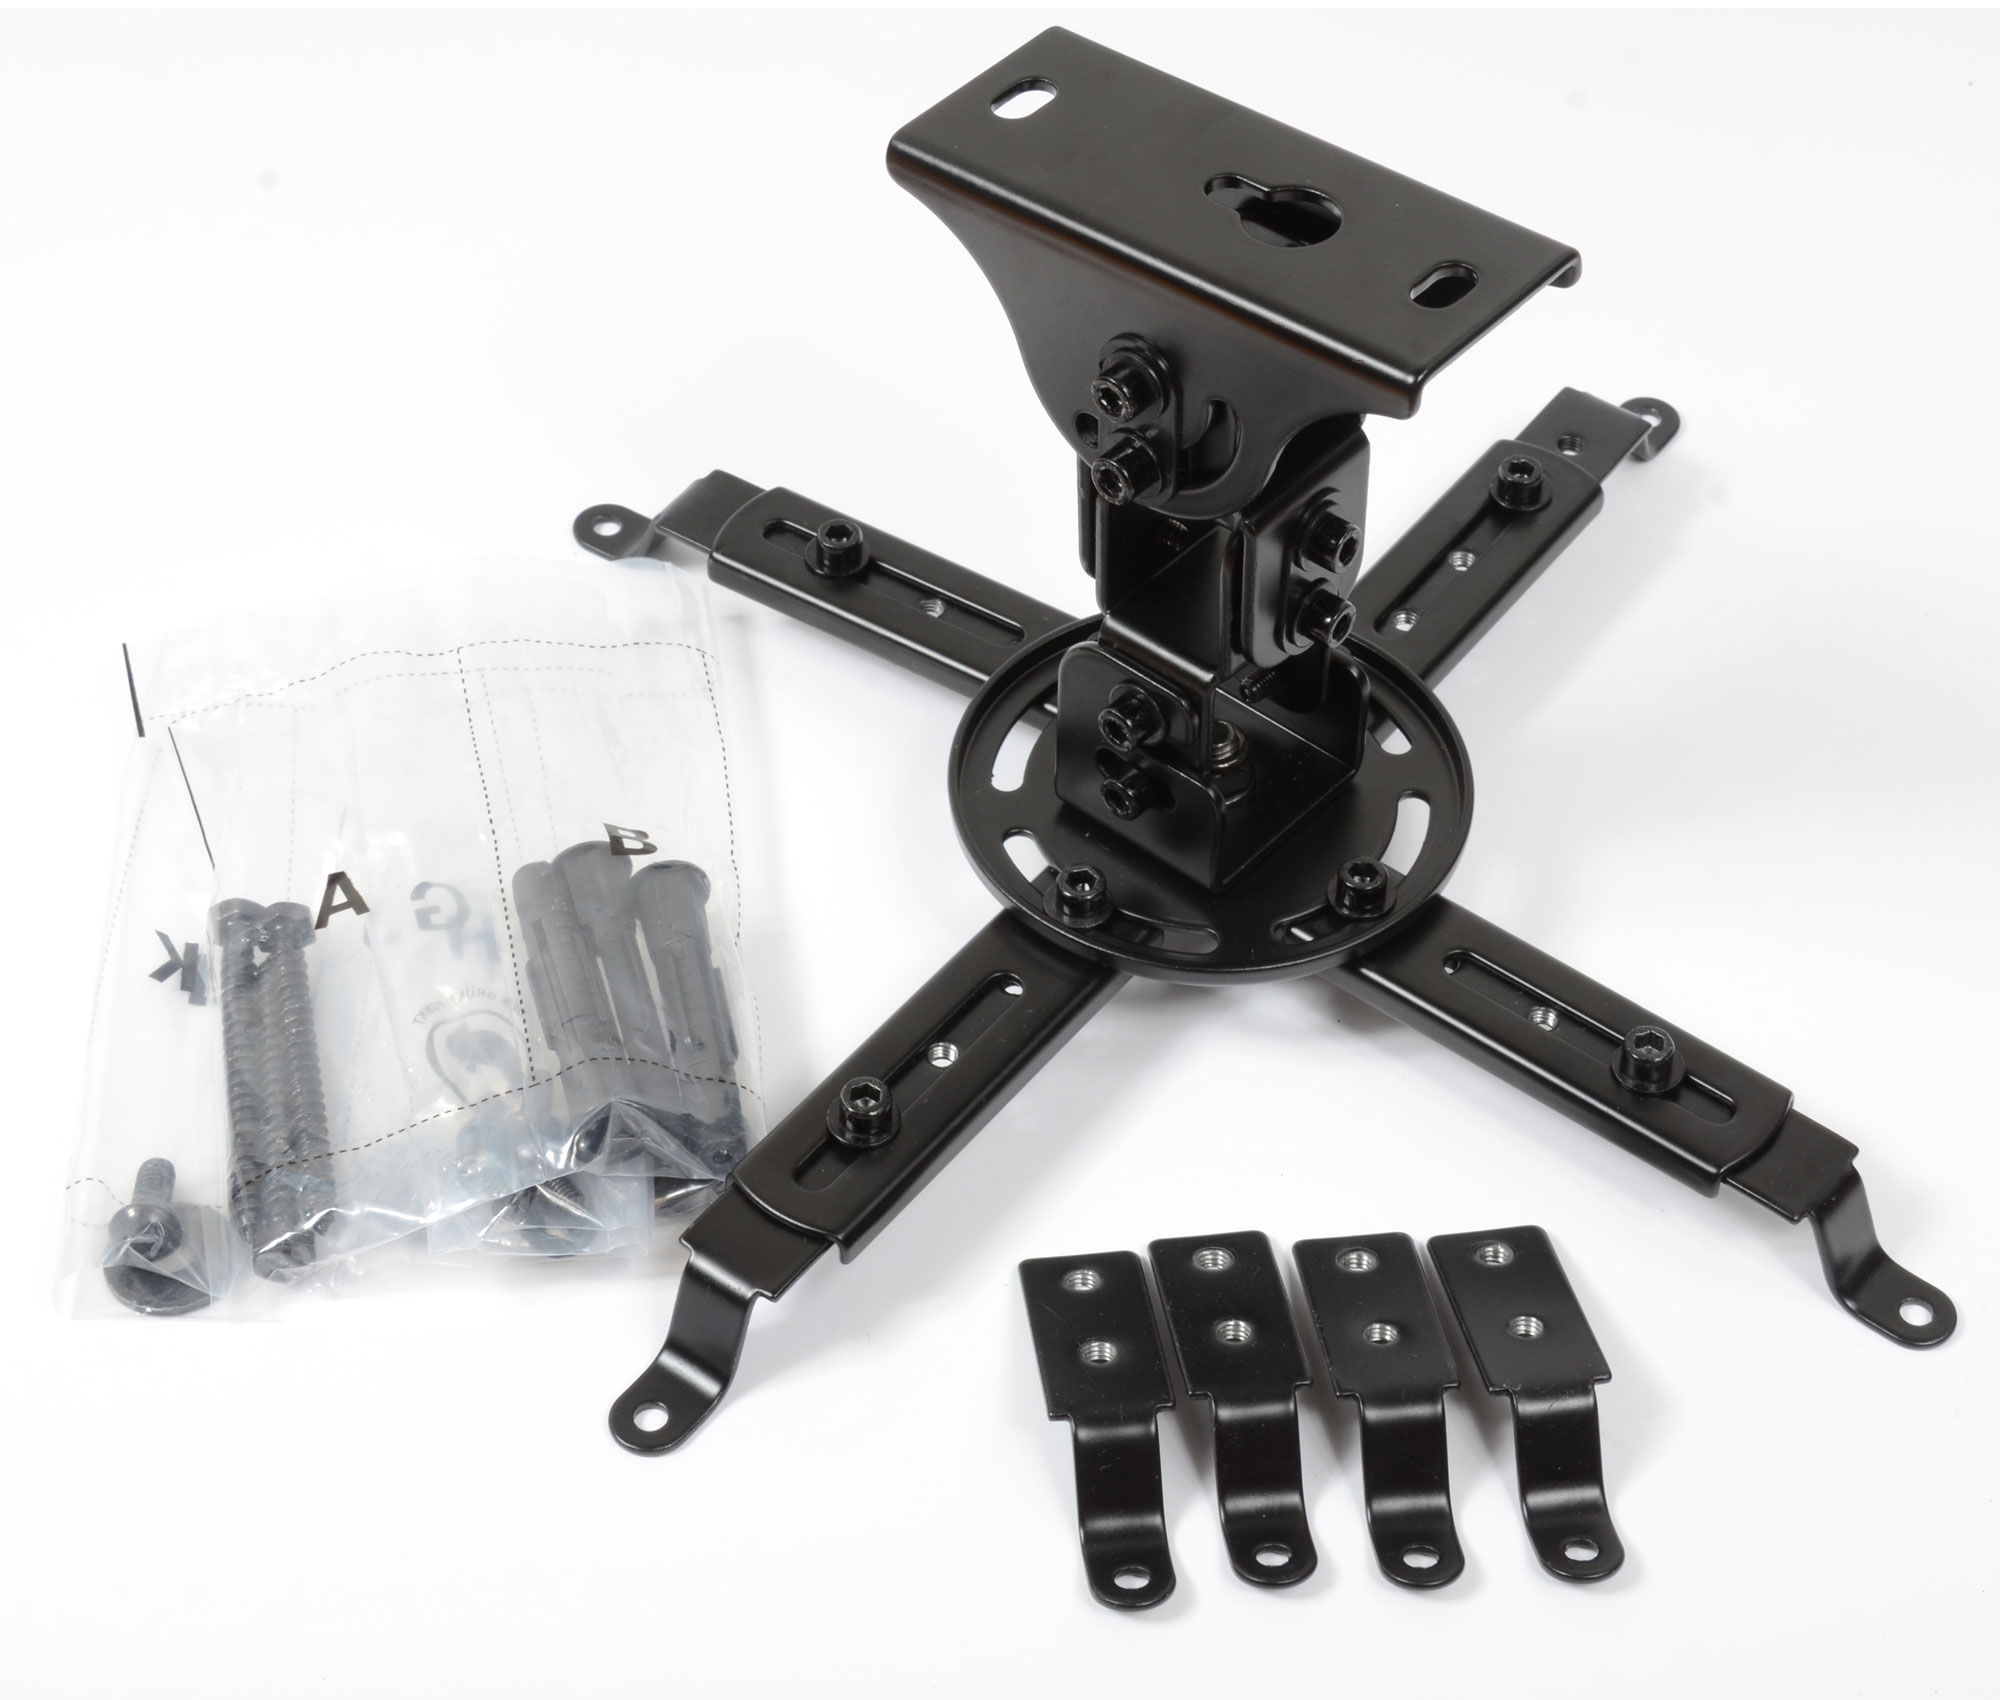 VideoSecu LCD DLP Ceiling Projector Mount with Tilt, Swivel and Rotate Black Bracket for Flat and Vaulted Ceiling bso - image 1 of 4